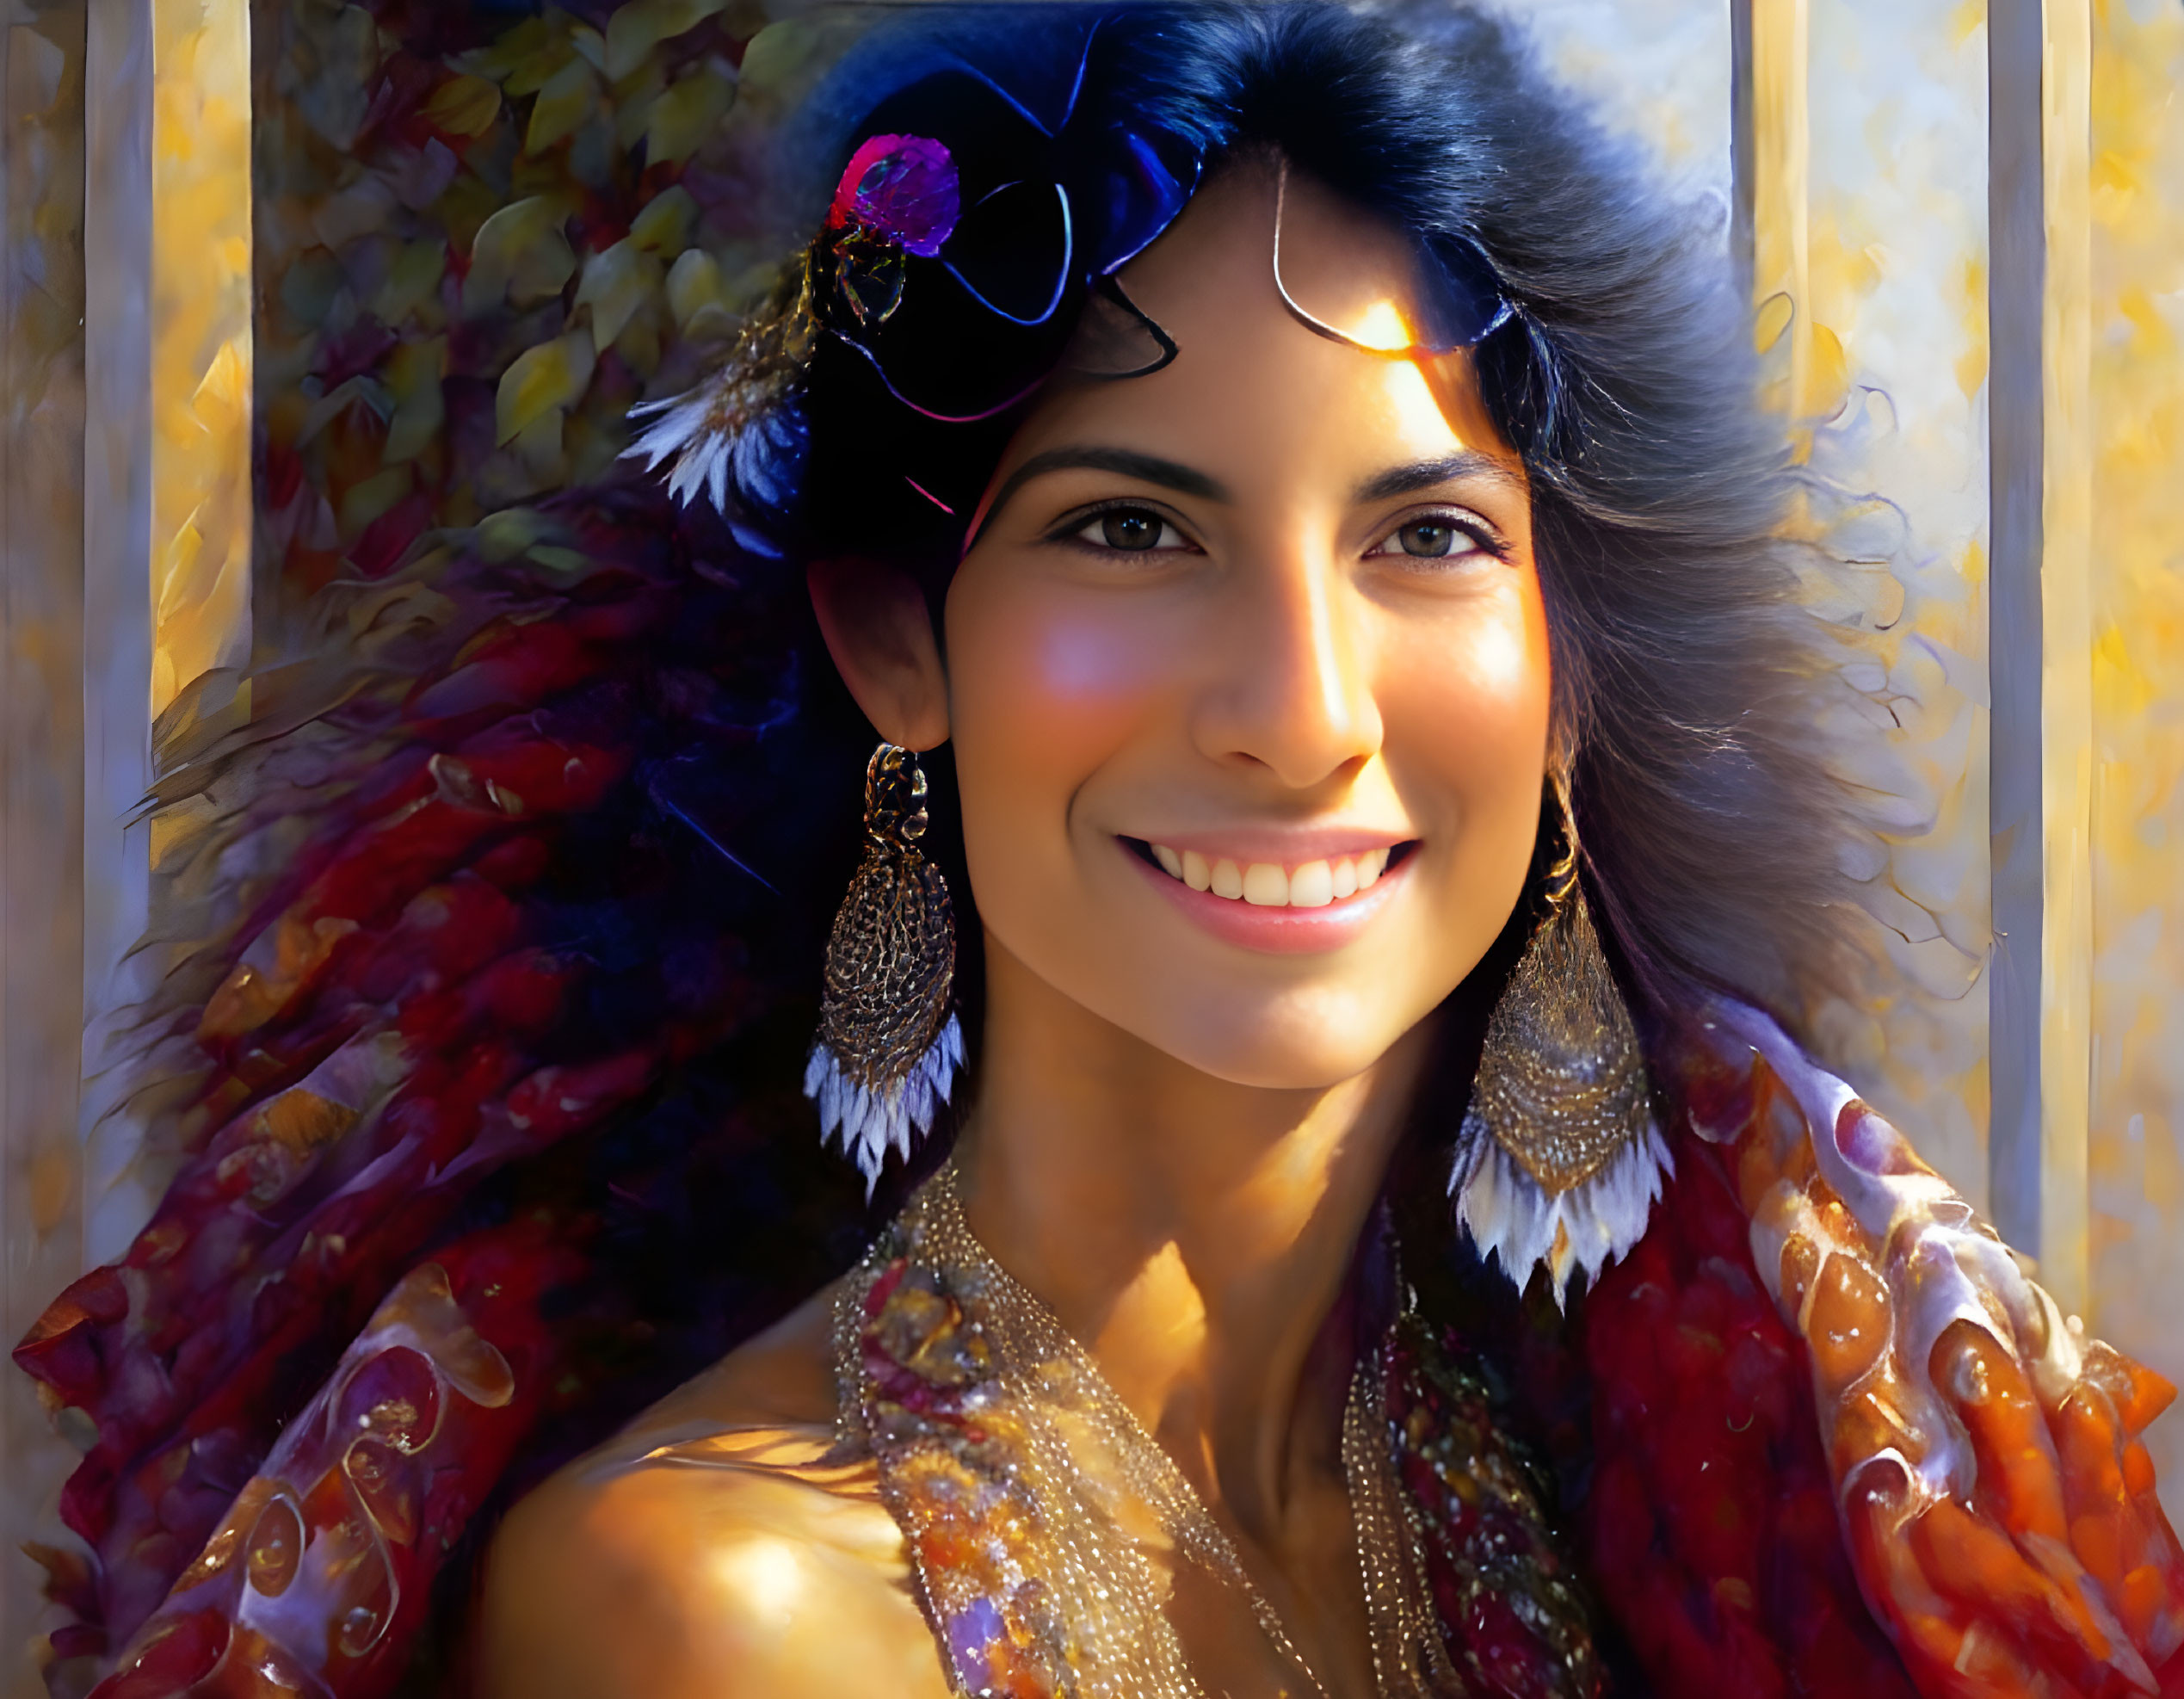 Smiling woman with decorative headpiece and vibrant colors